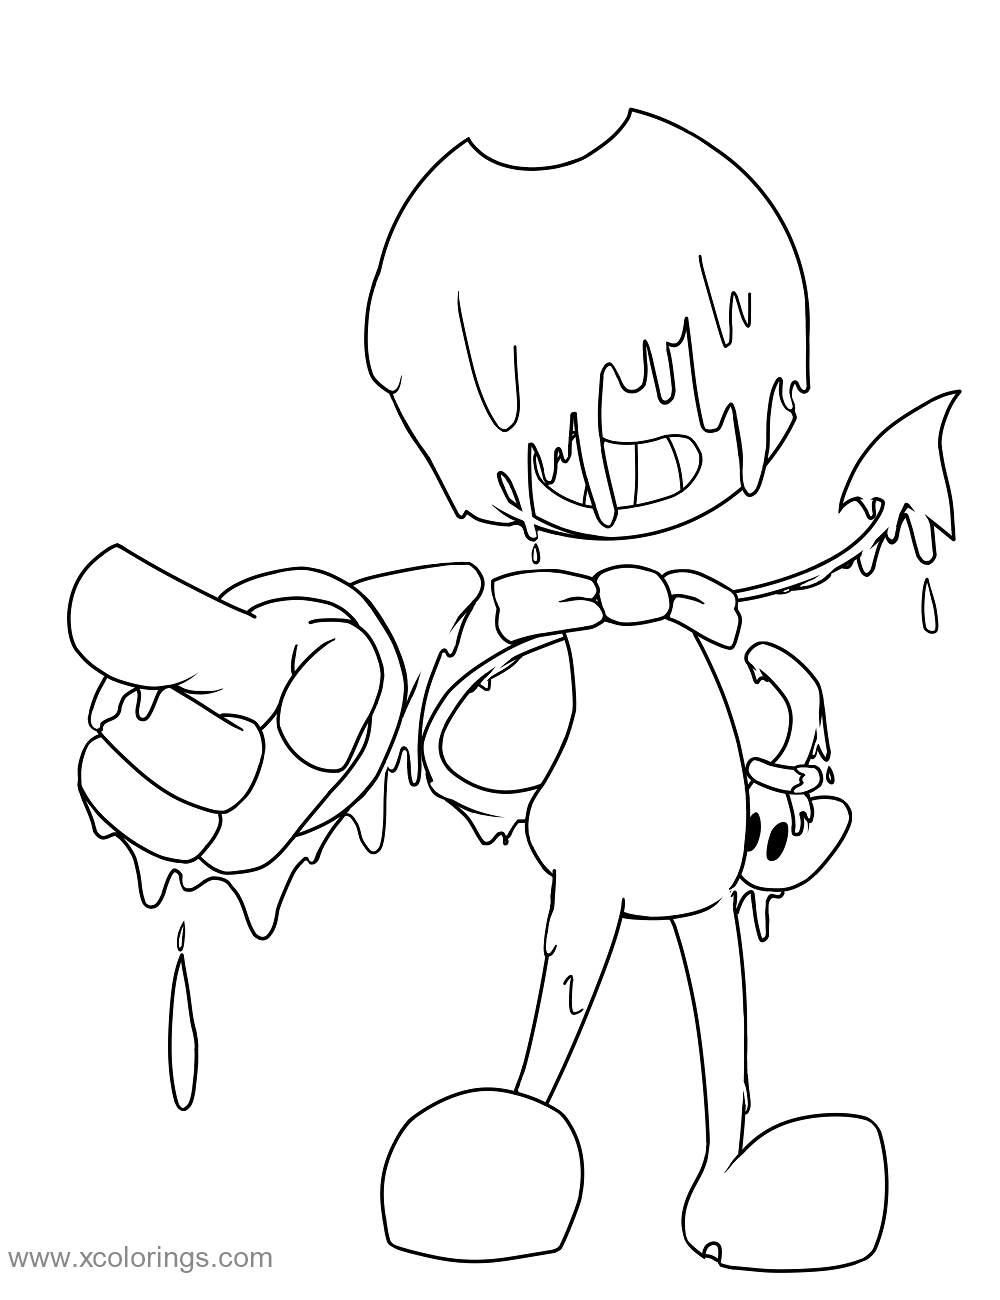 Bendy is Melting Coloring Pages - XColorings.com